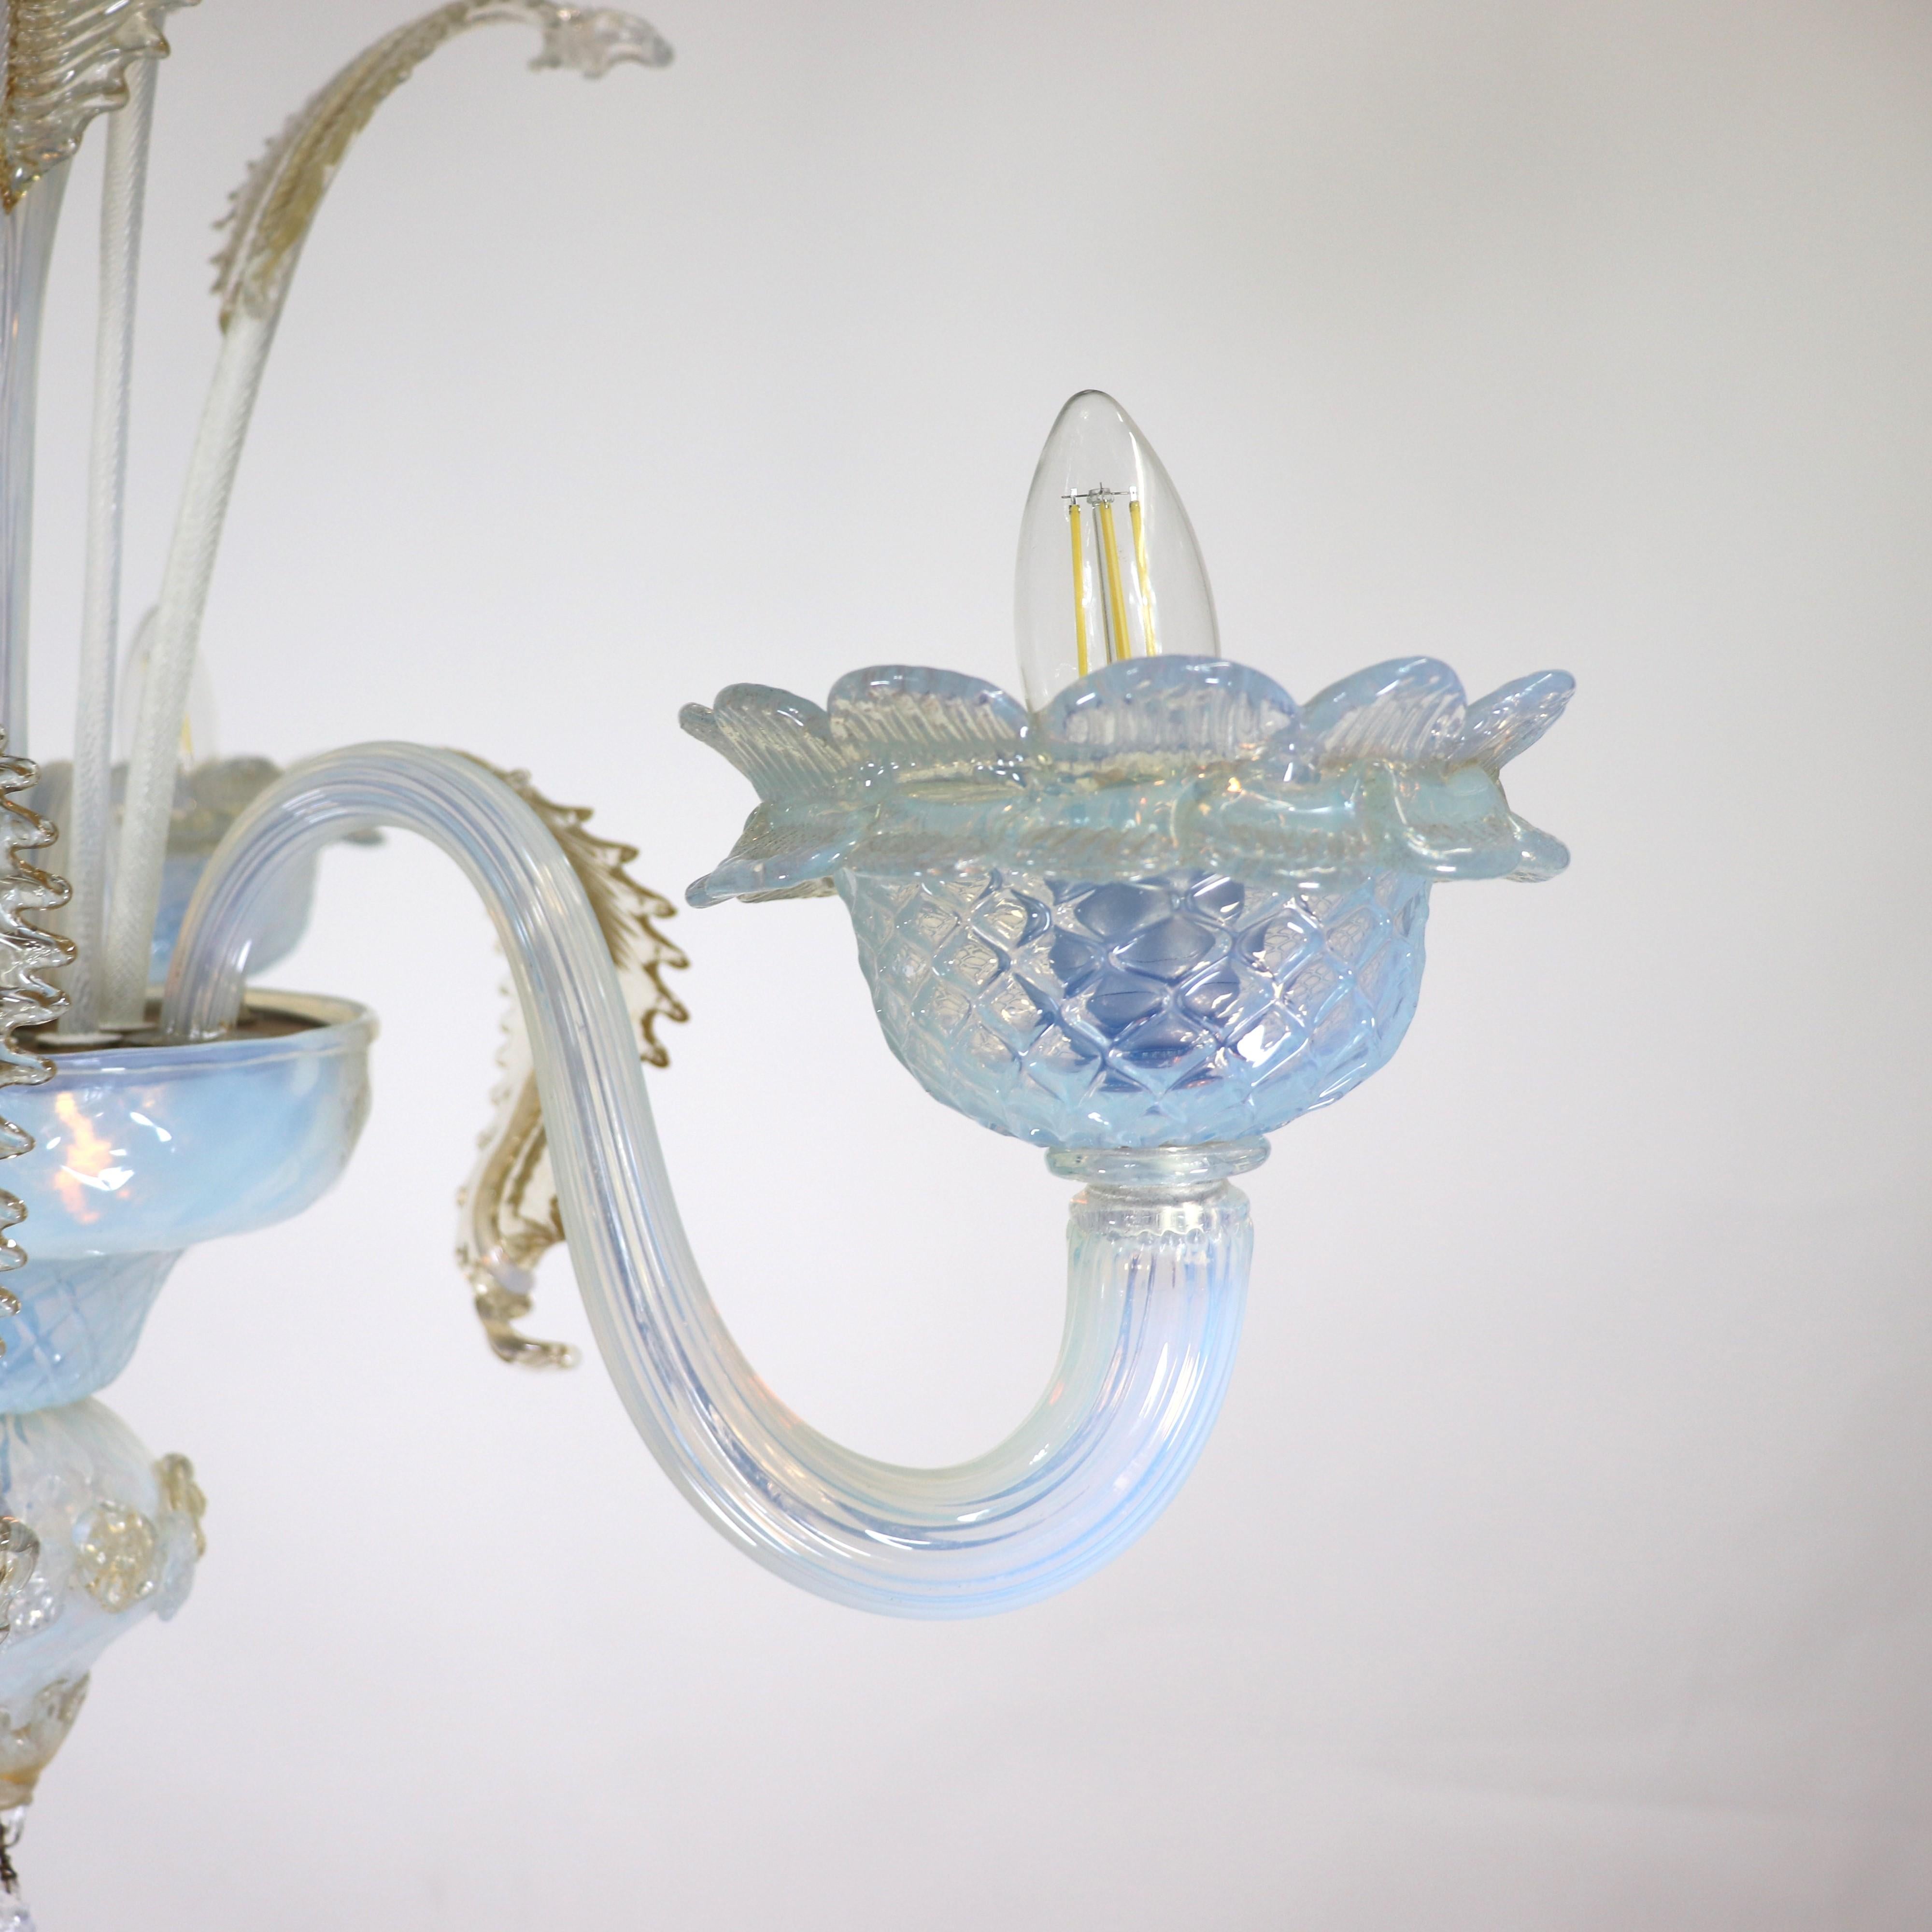 Vintage Baroque Style Gold Infused Opaline Murano Chandelier For Sale 2